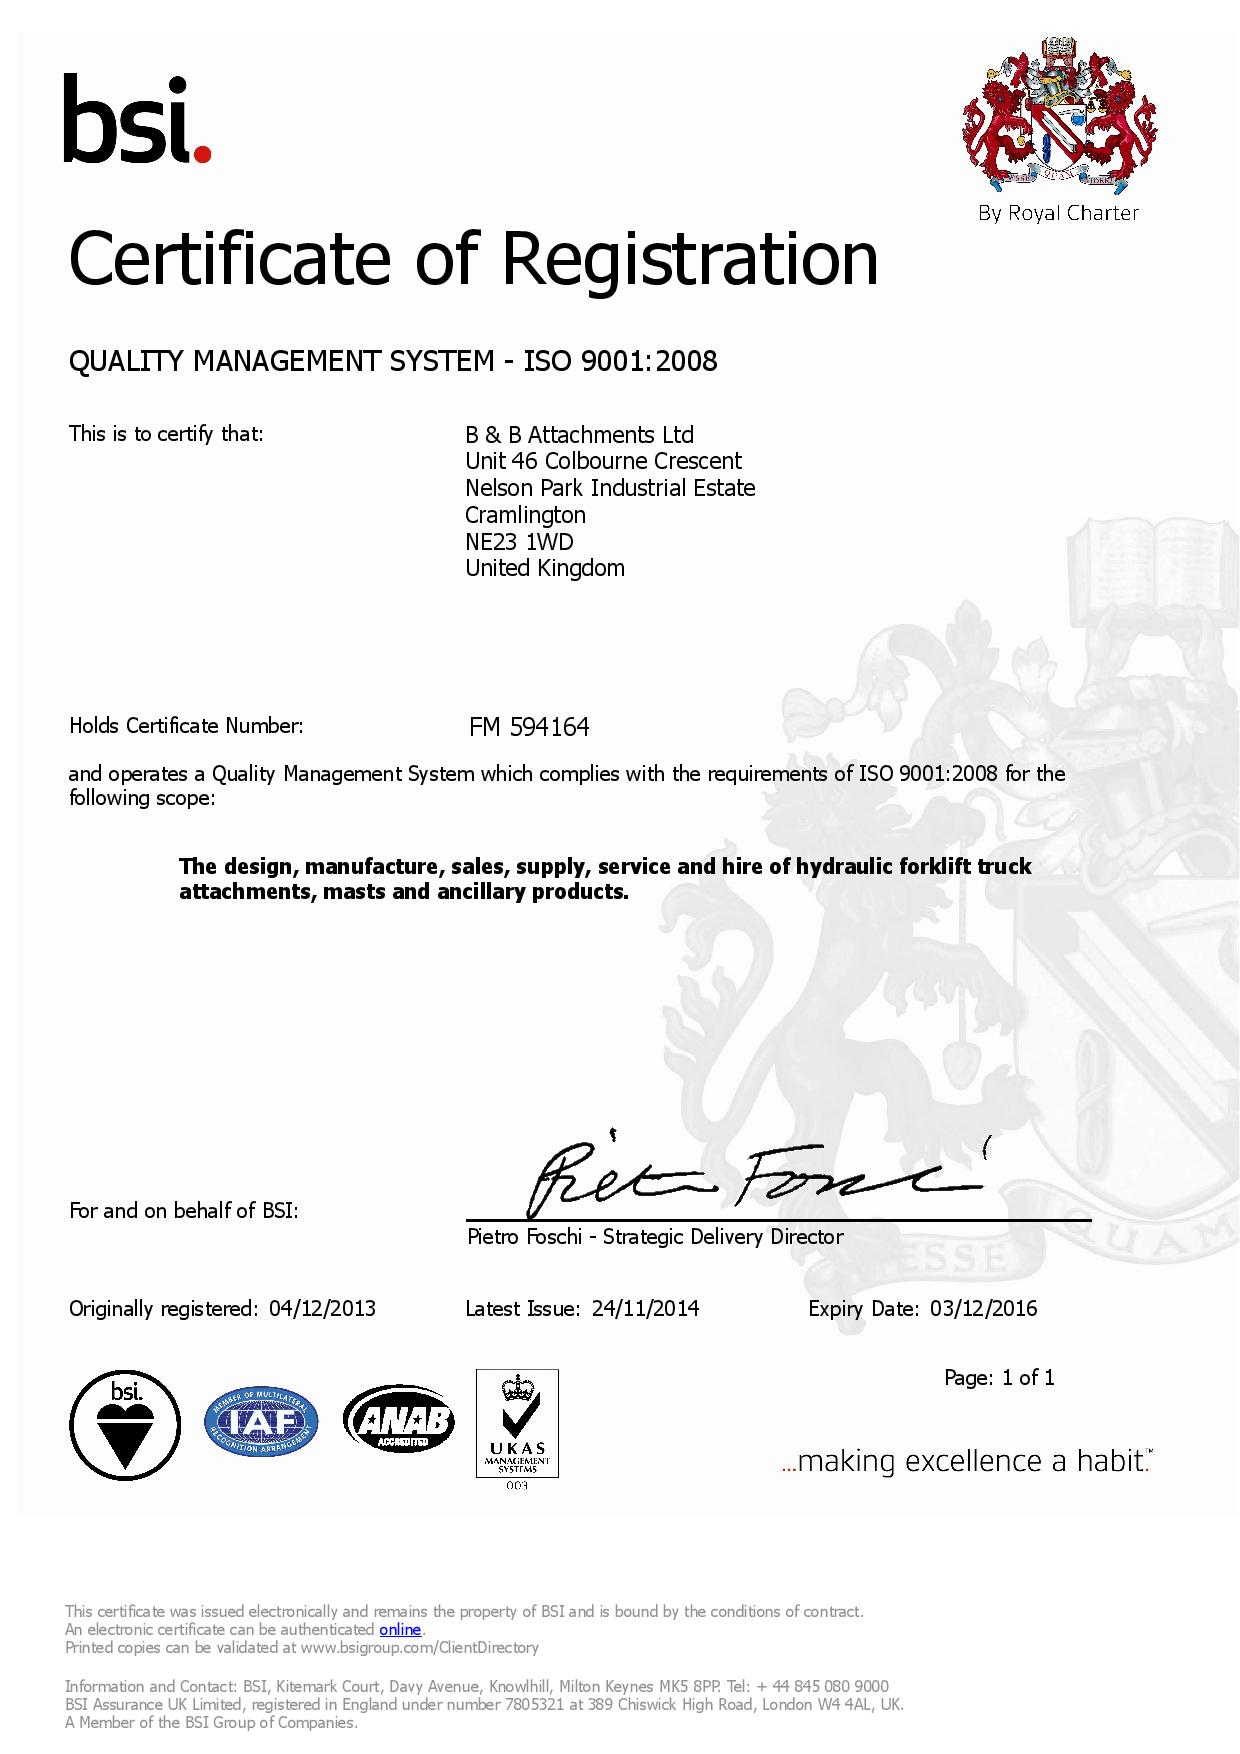 B&B Attachments successfully certified according to ISO 9001:2008